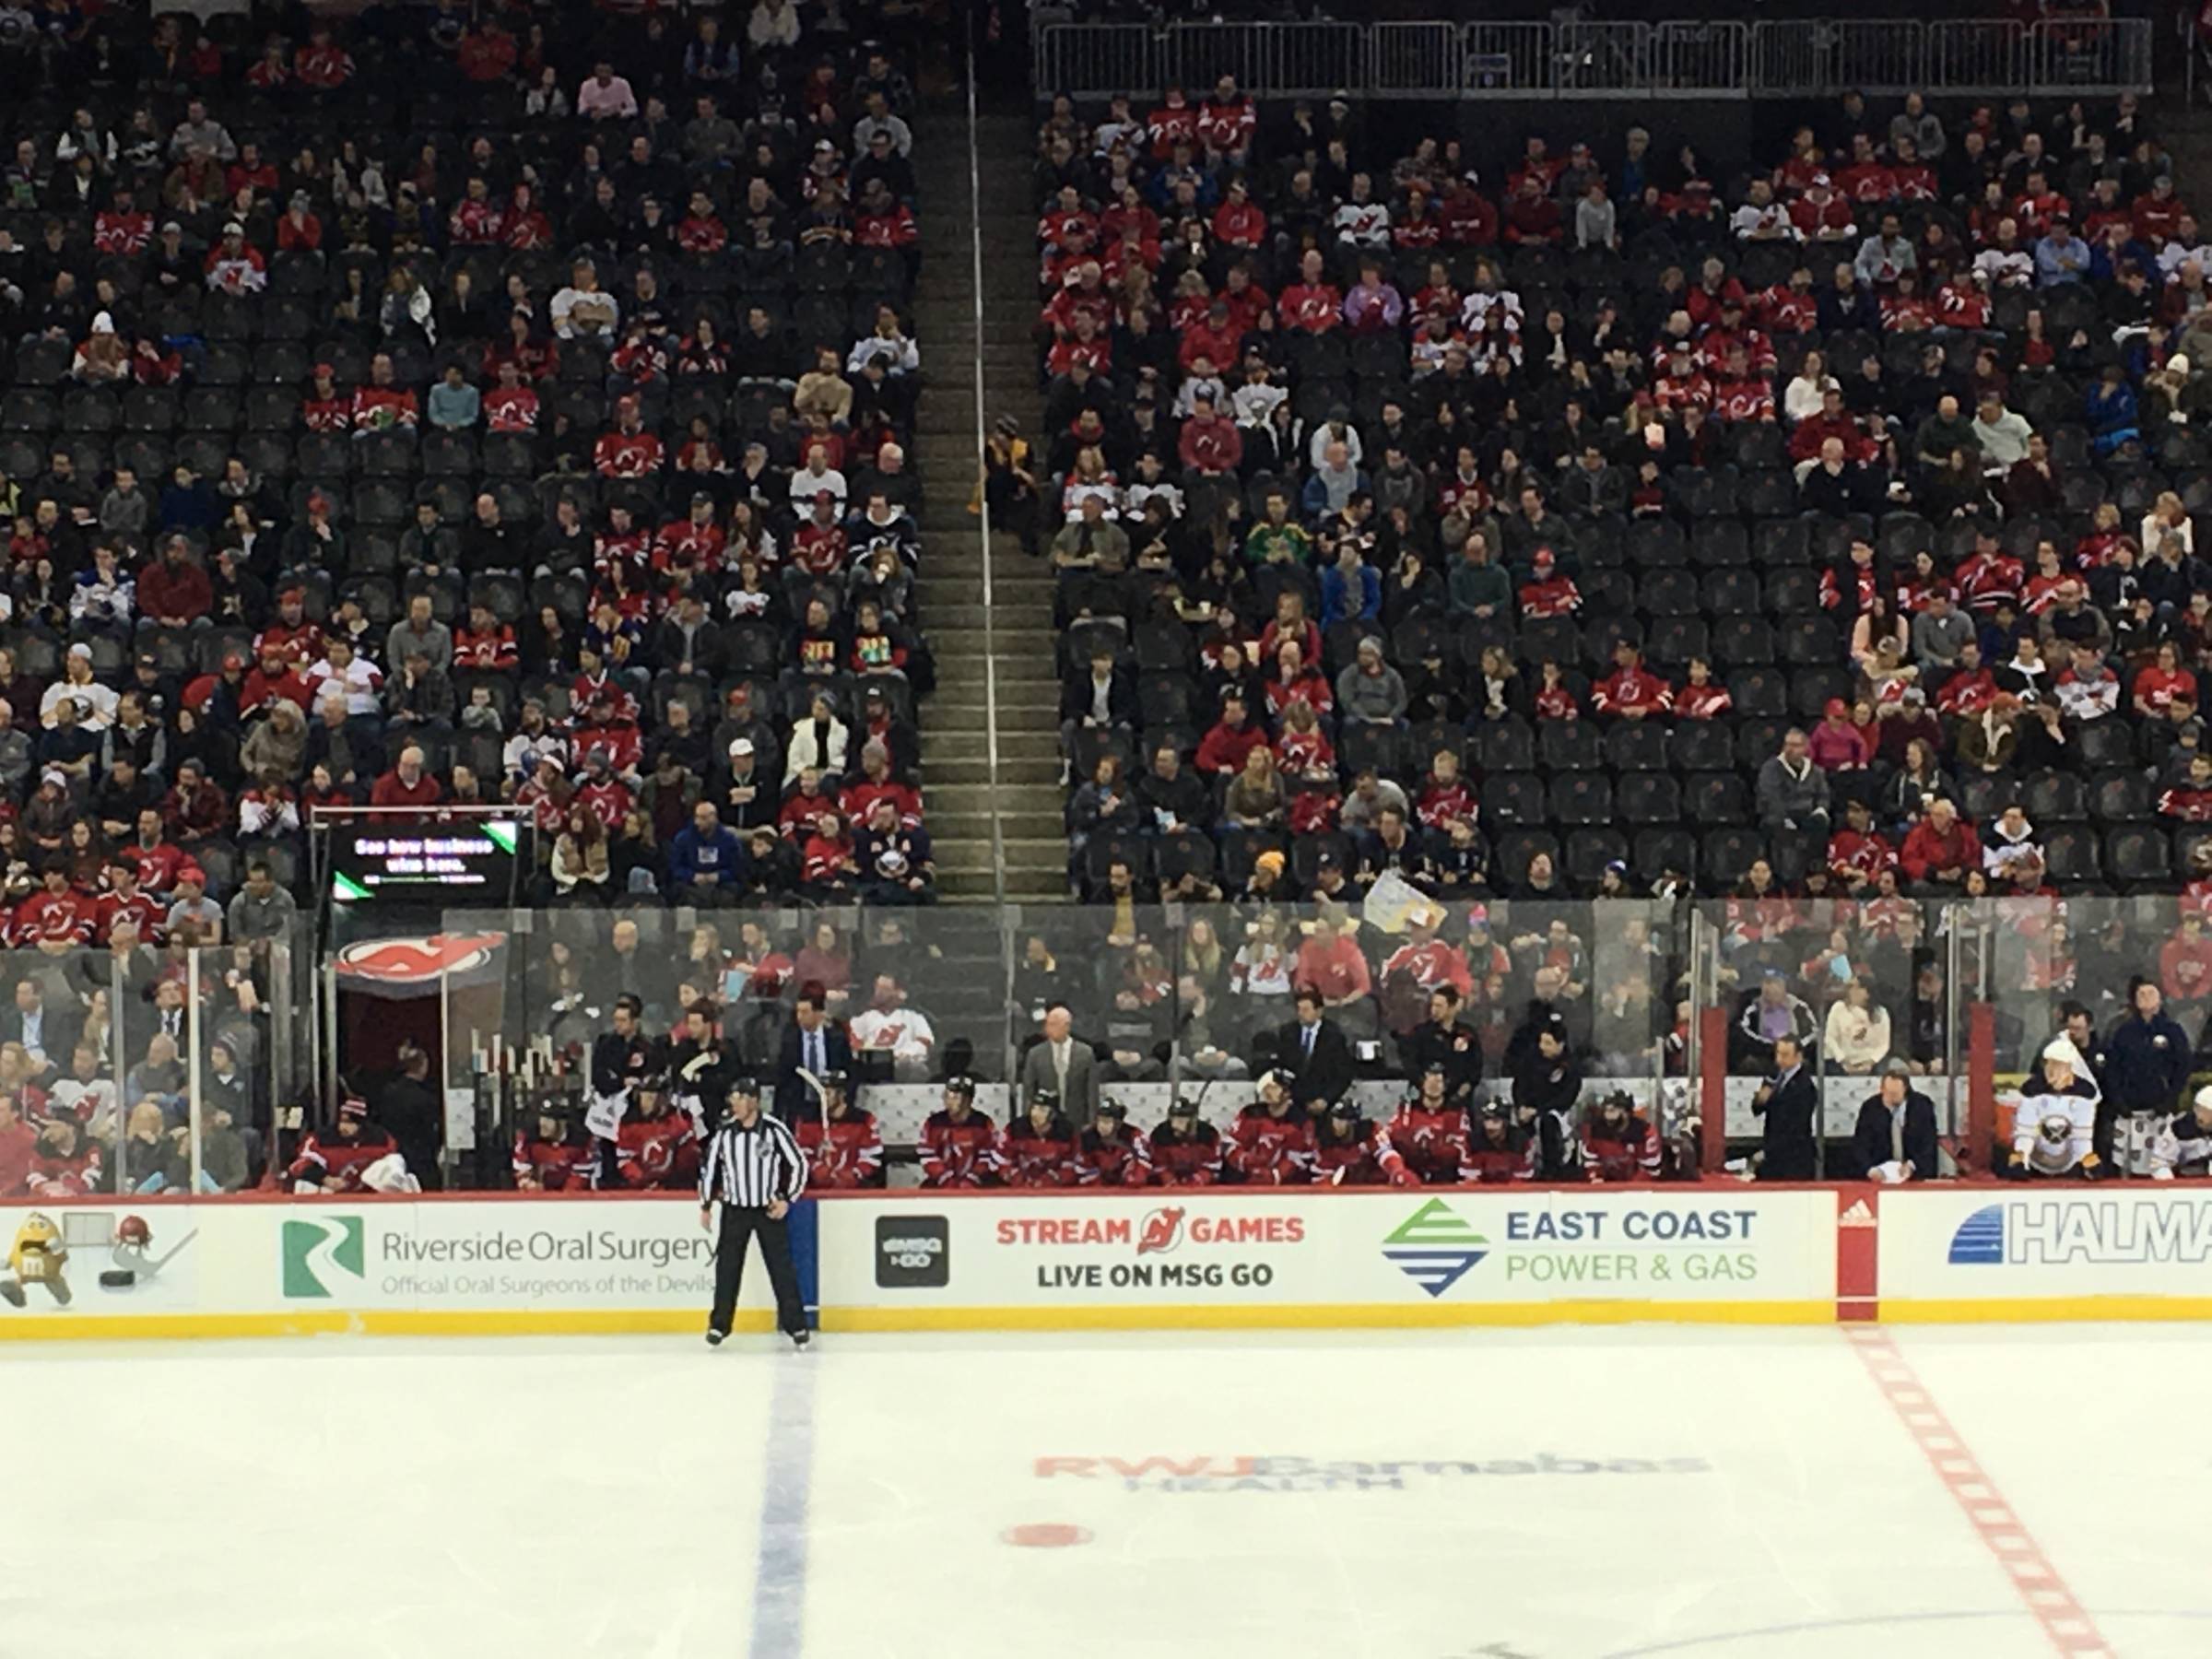 Devils Bench at Prudential Center